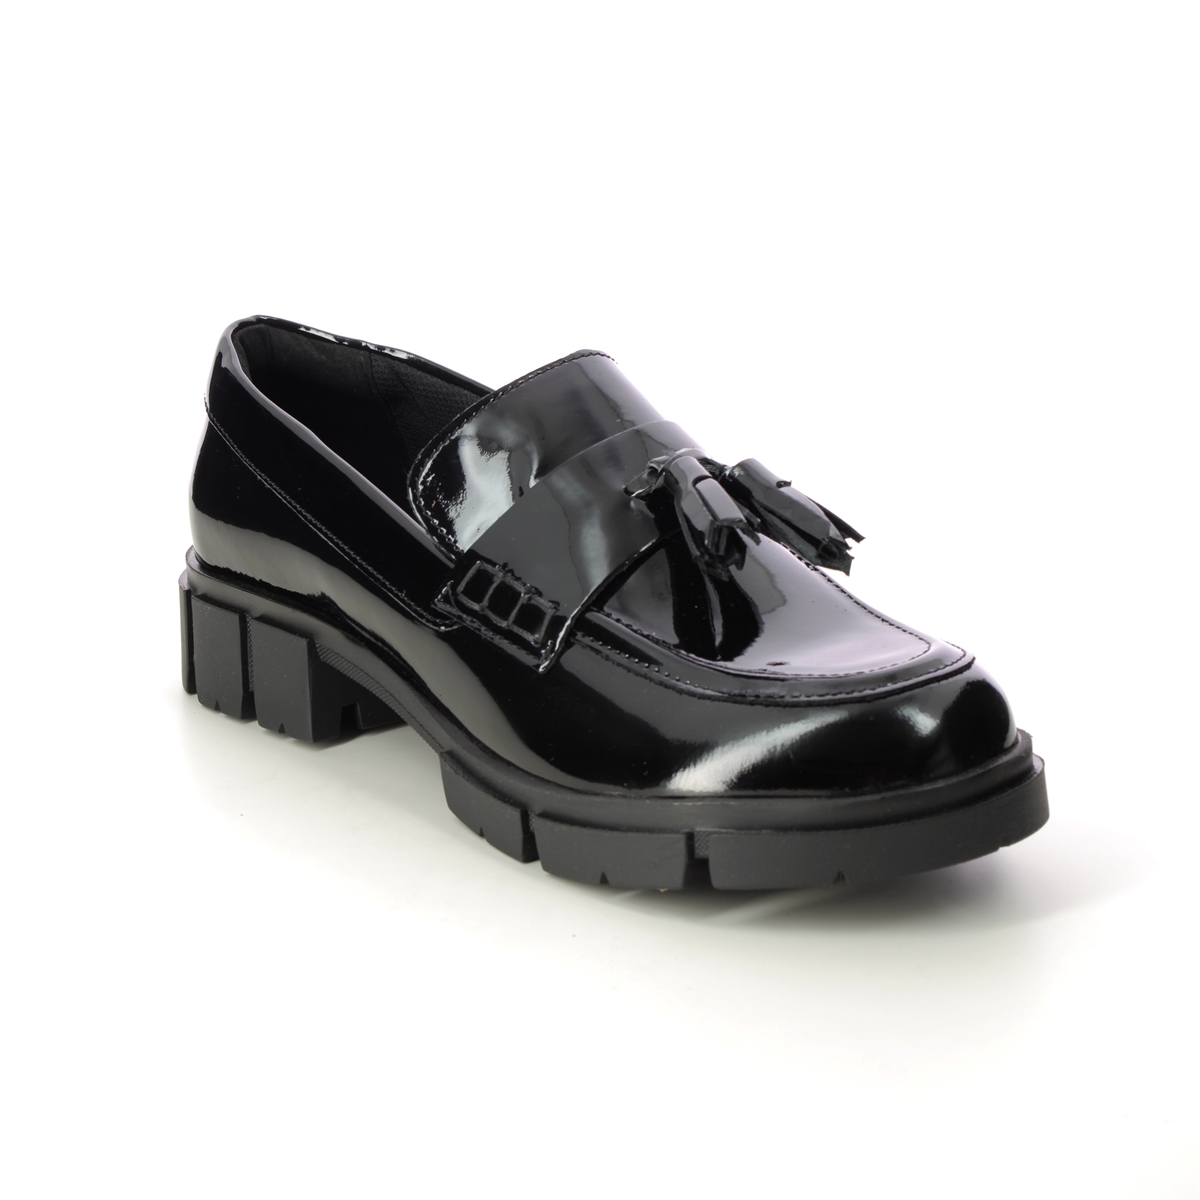 Clarks Teala Loafer Black Patent Womens Loafers 689984D In Size 6.5 In Plain Black Patent